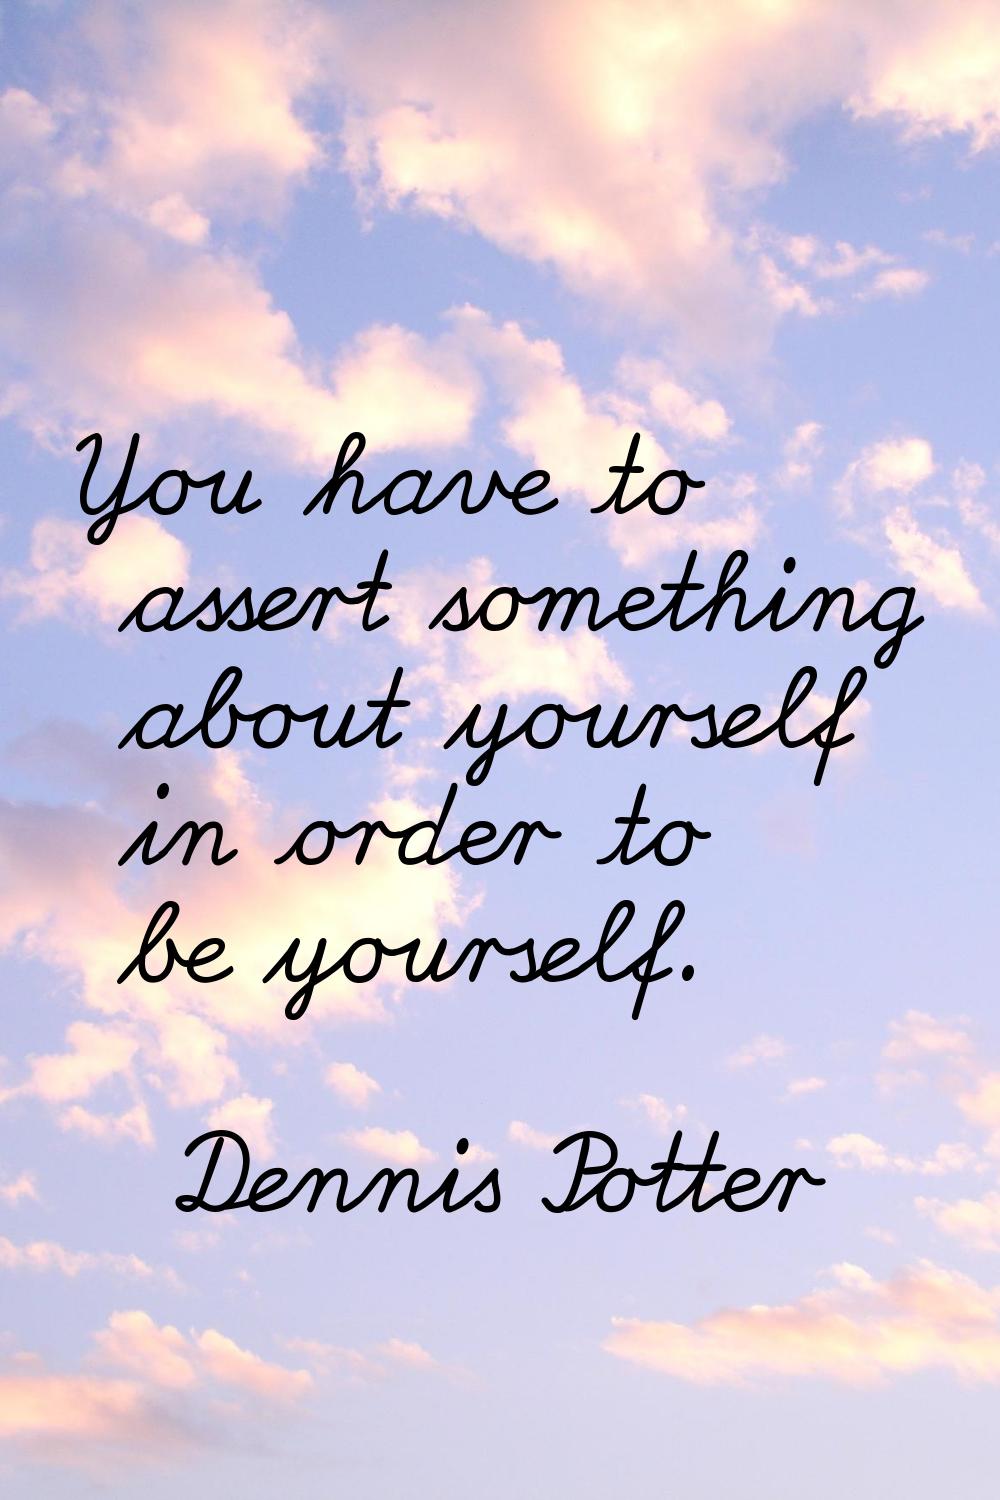 You have to assert something about yourself in order to be yourself.